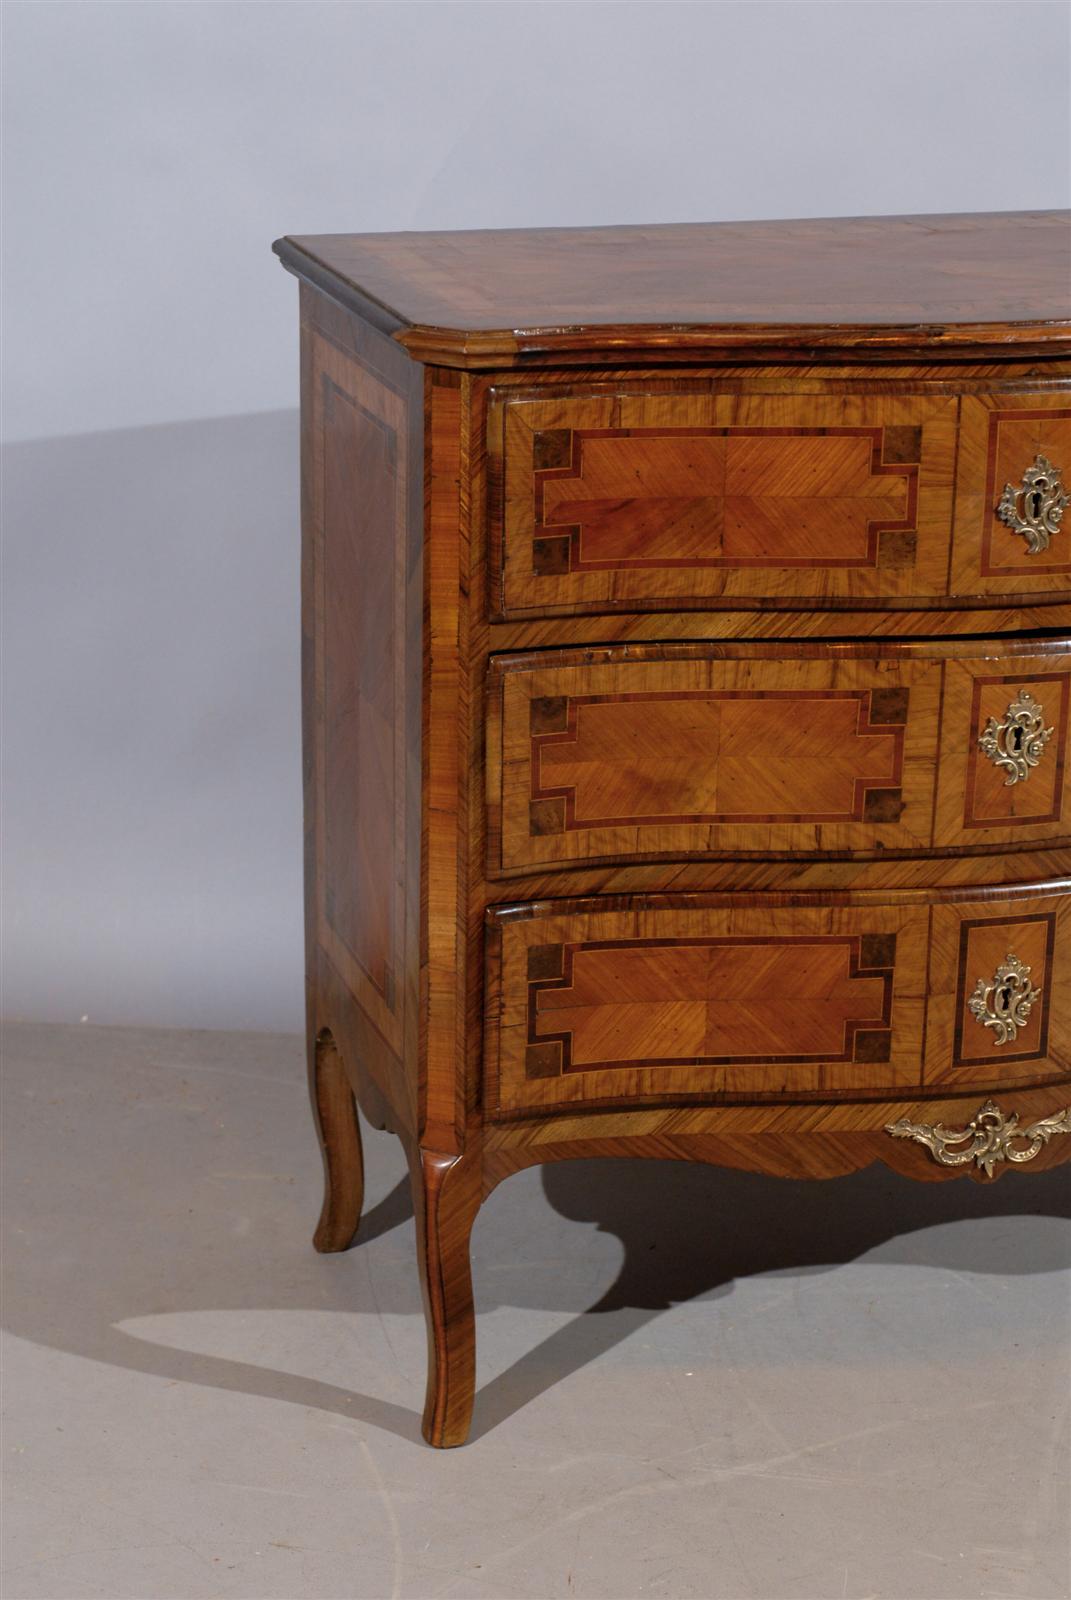 19th Century Italian Neoclassical Inlaid Commode with Serpentine Front, circa 1800